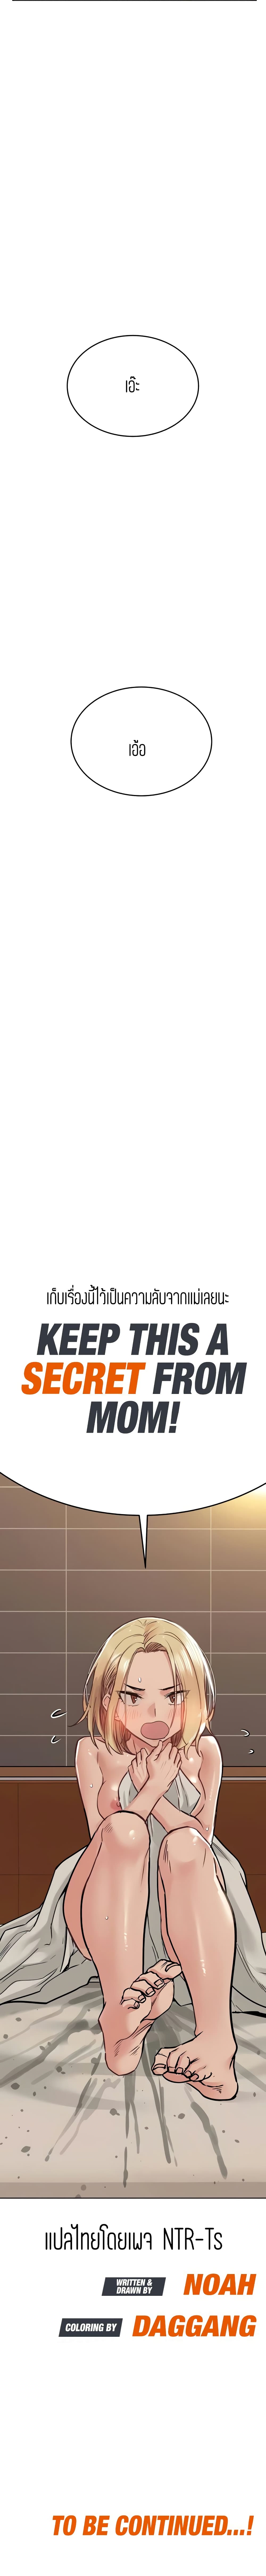 Keep it a secret from your mother!